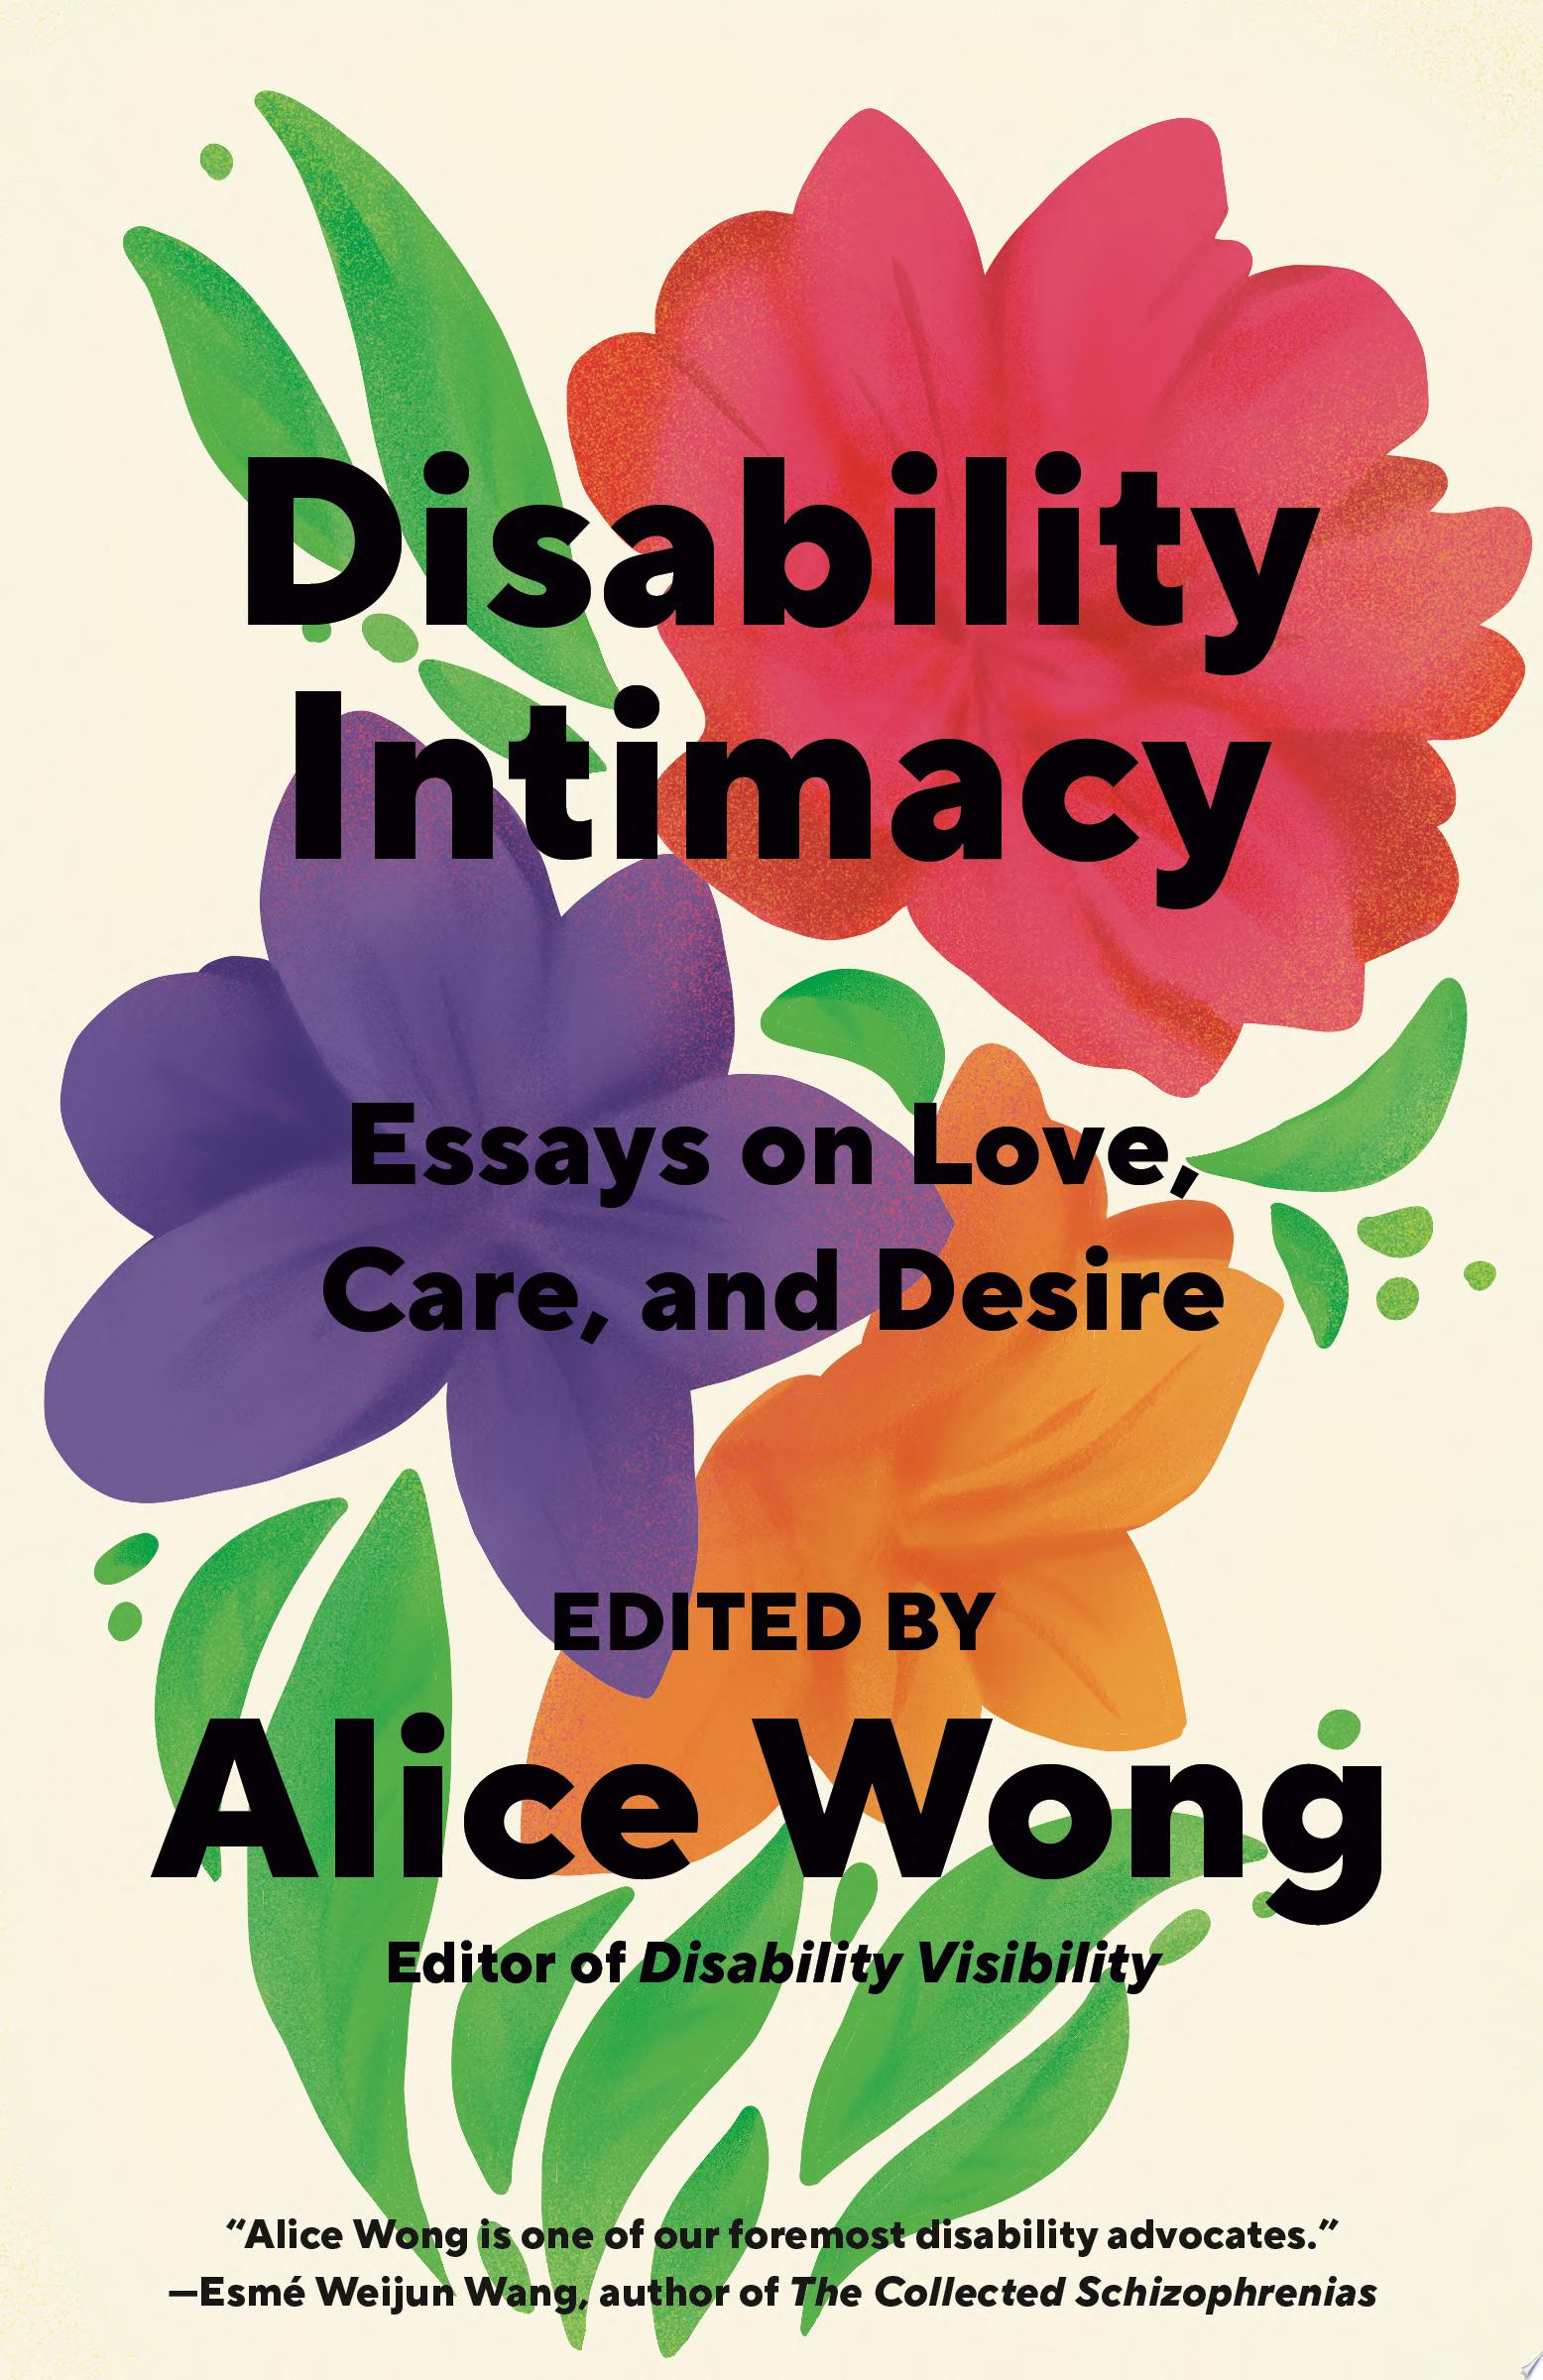 Image for "Disability Intimacy"